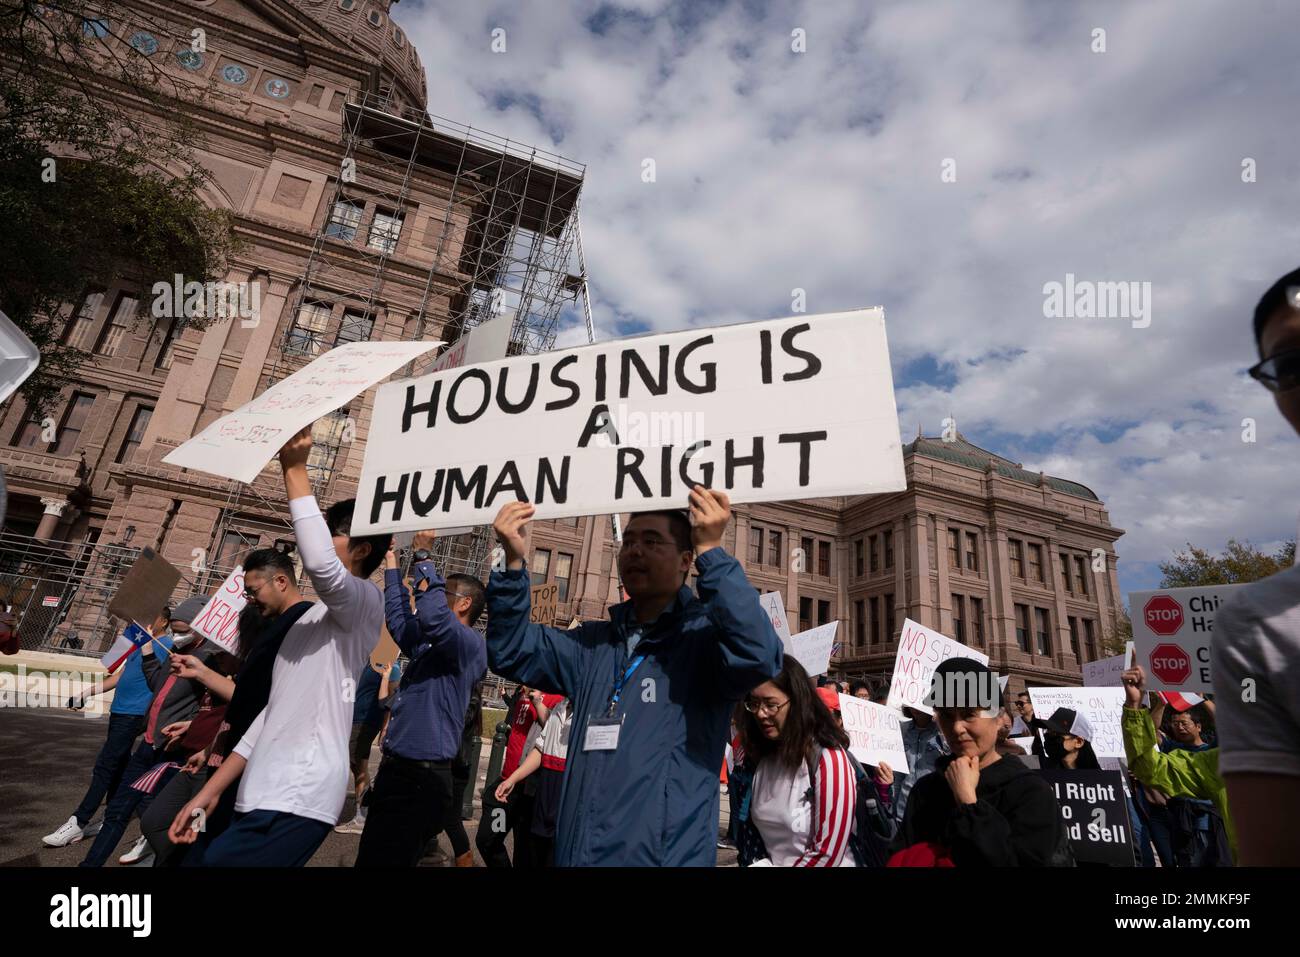 Austin Texas USA, January 29, 2023: A coalition of Texas Asian-American groups protests at the Texas Capitol against bills proposed in the Texas Senate that would restrict ownership of Texas properties from citizens of certain countries including China, Iran, and North Korea. Governor Greg Abbott and his supporters in the Texas Senate are proposing the measures, they say, for security reasons. Credit: Bob Daemmrich/Alamy Live News Stock Photo